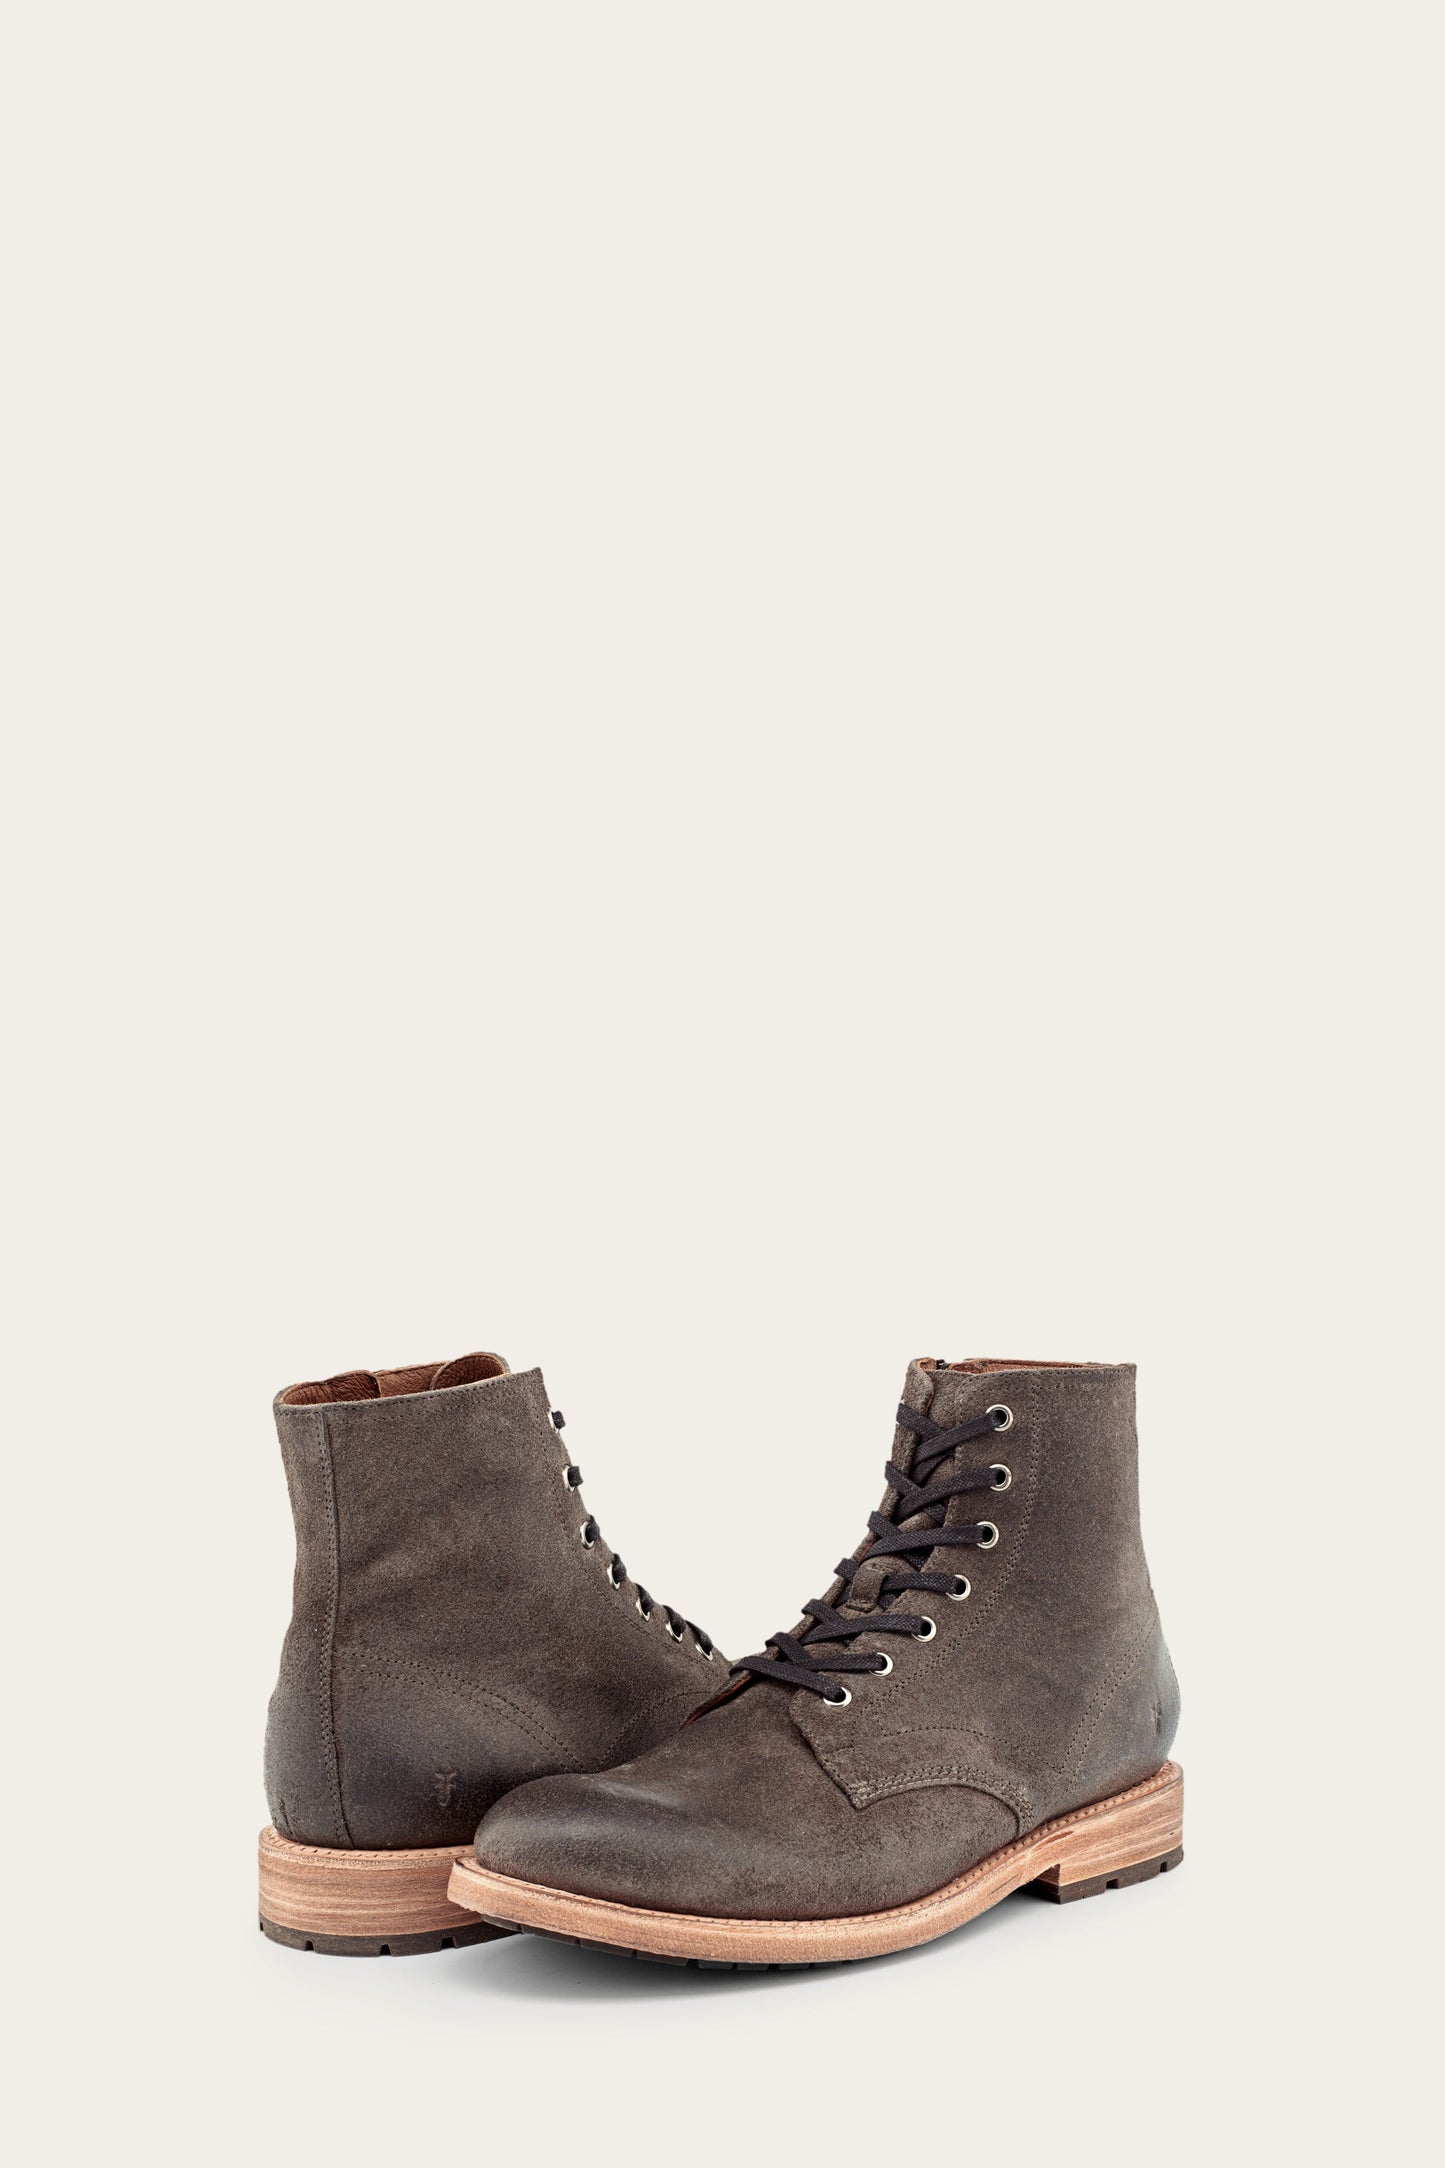 Bowery Lace Up - Grey - Pair